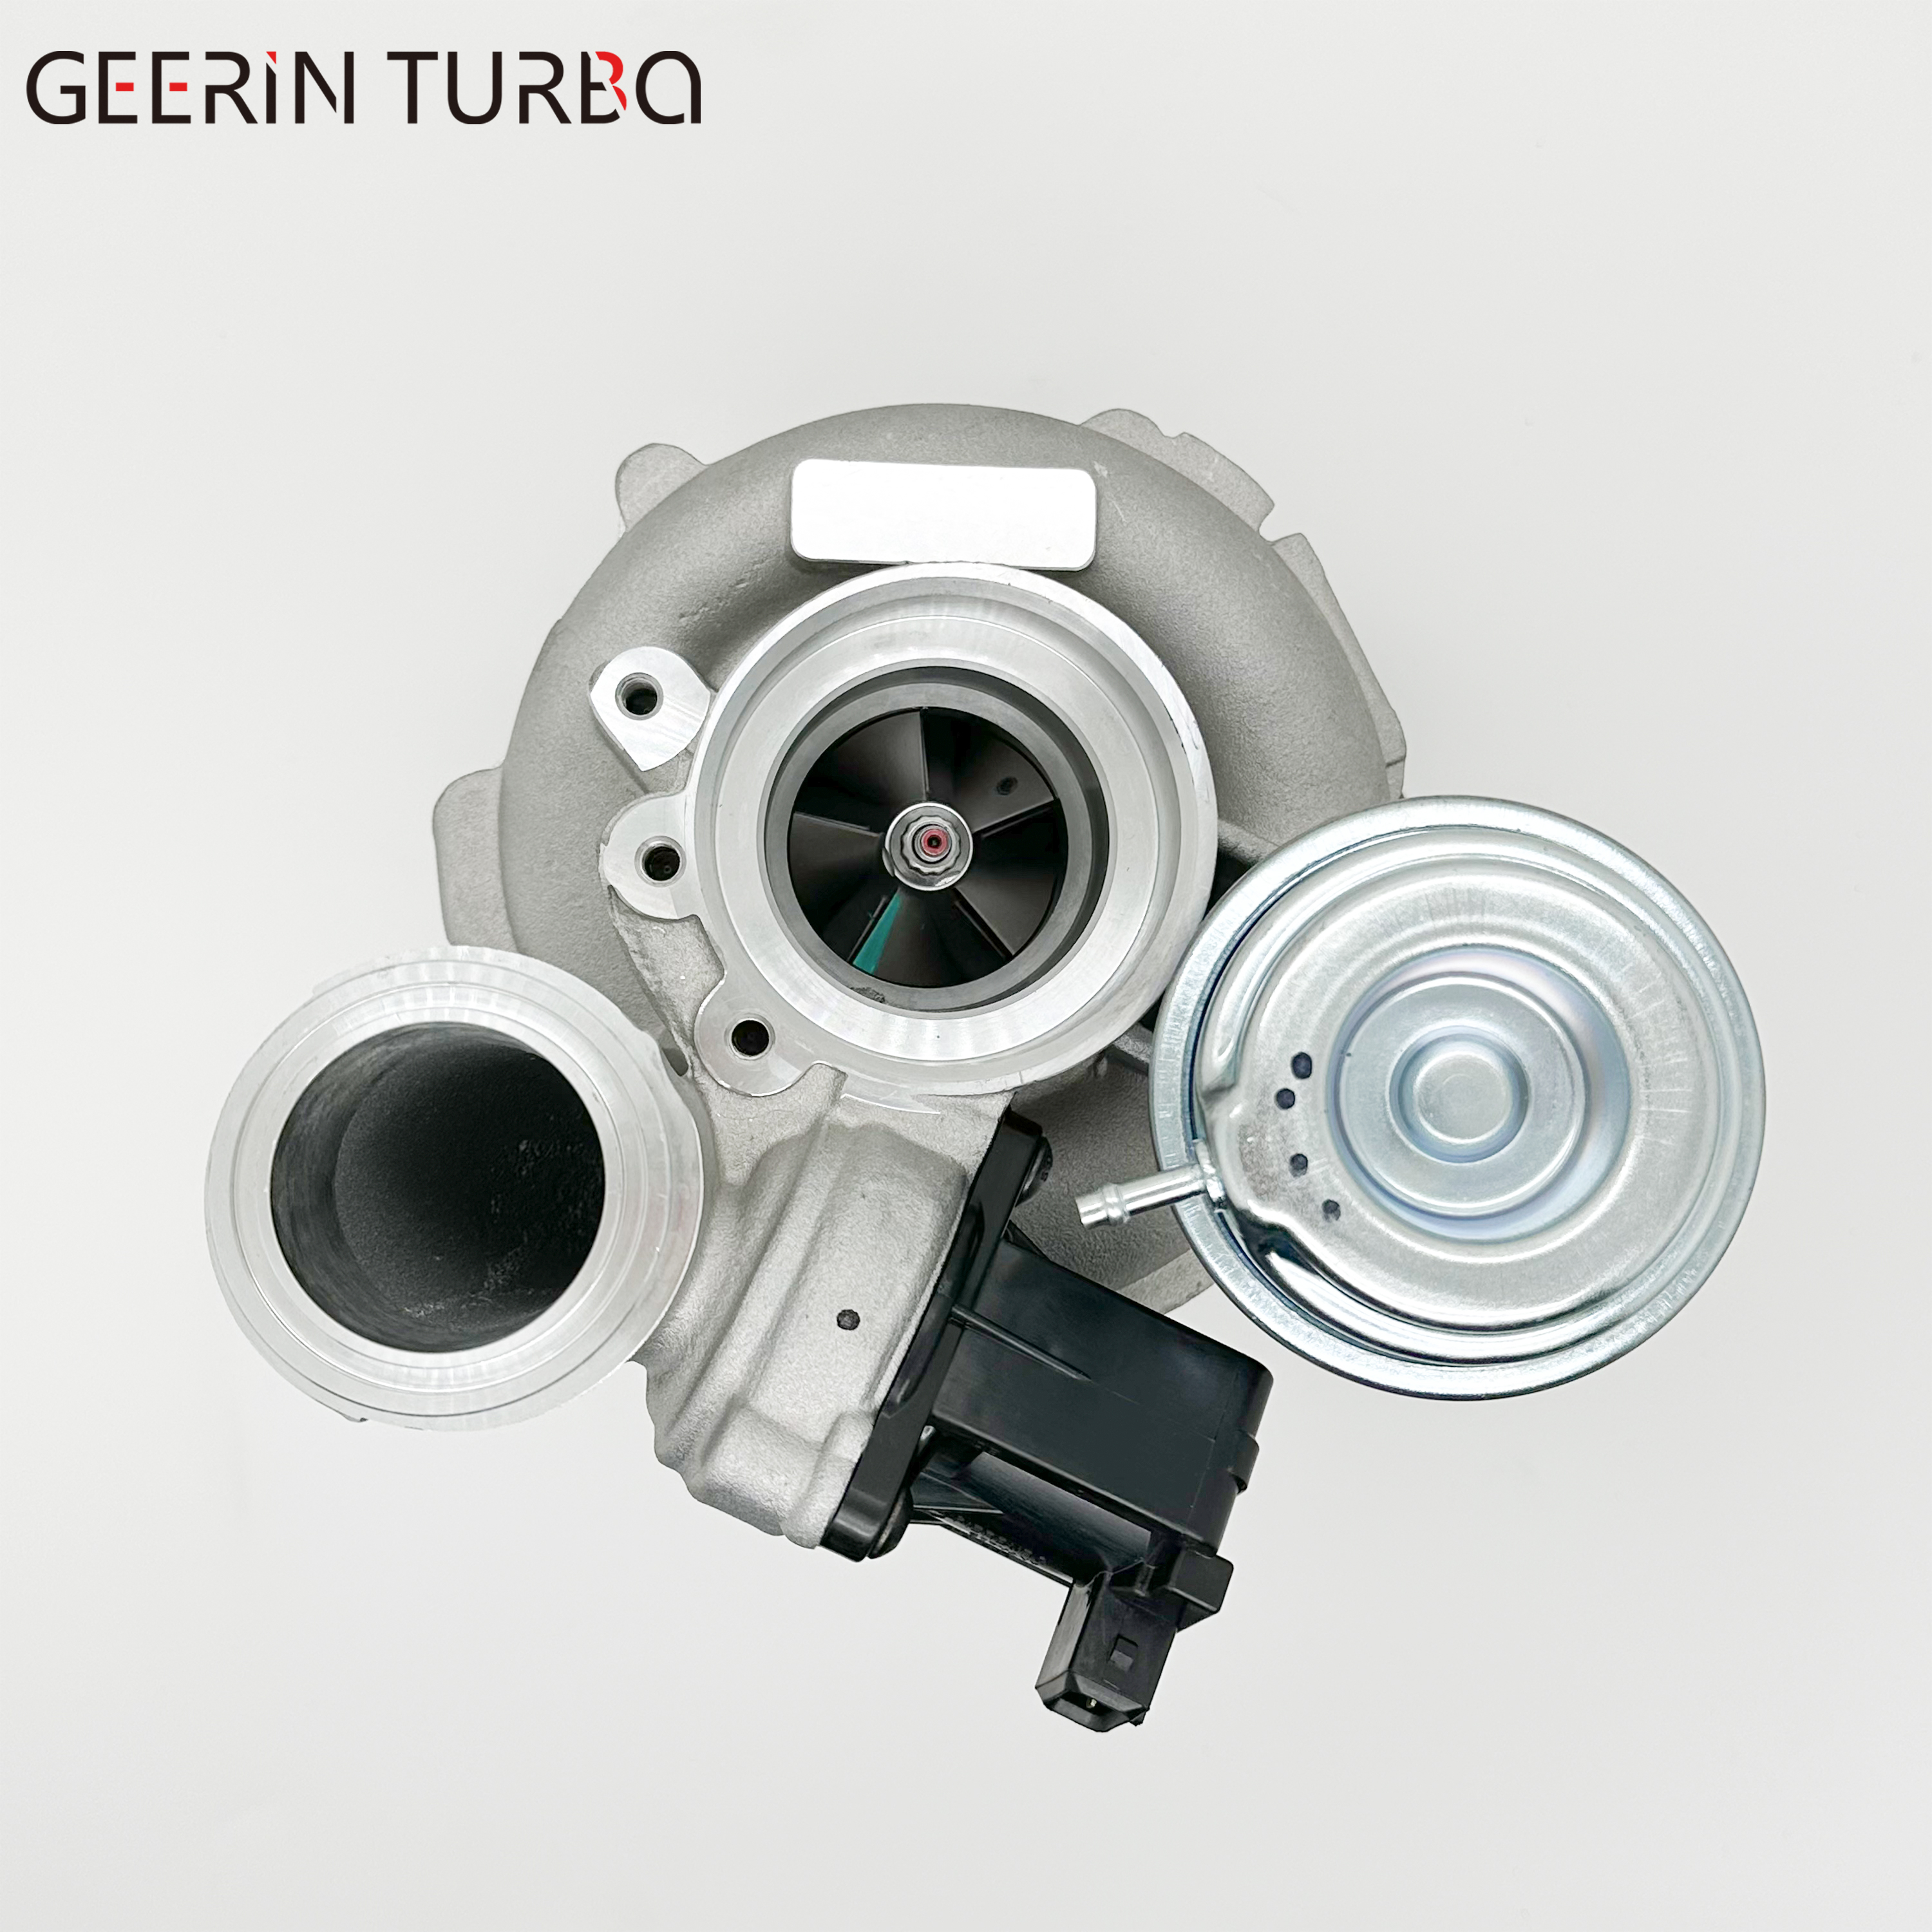 Turbocharger Manufacture MGT2256S 769155-5015S 793647-5009S 821719-5002S 821719-5003S Full Turbo Assy For BMW 4.4 X6 Factory